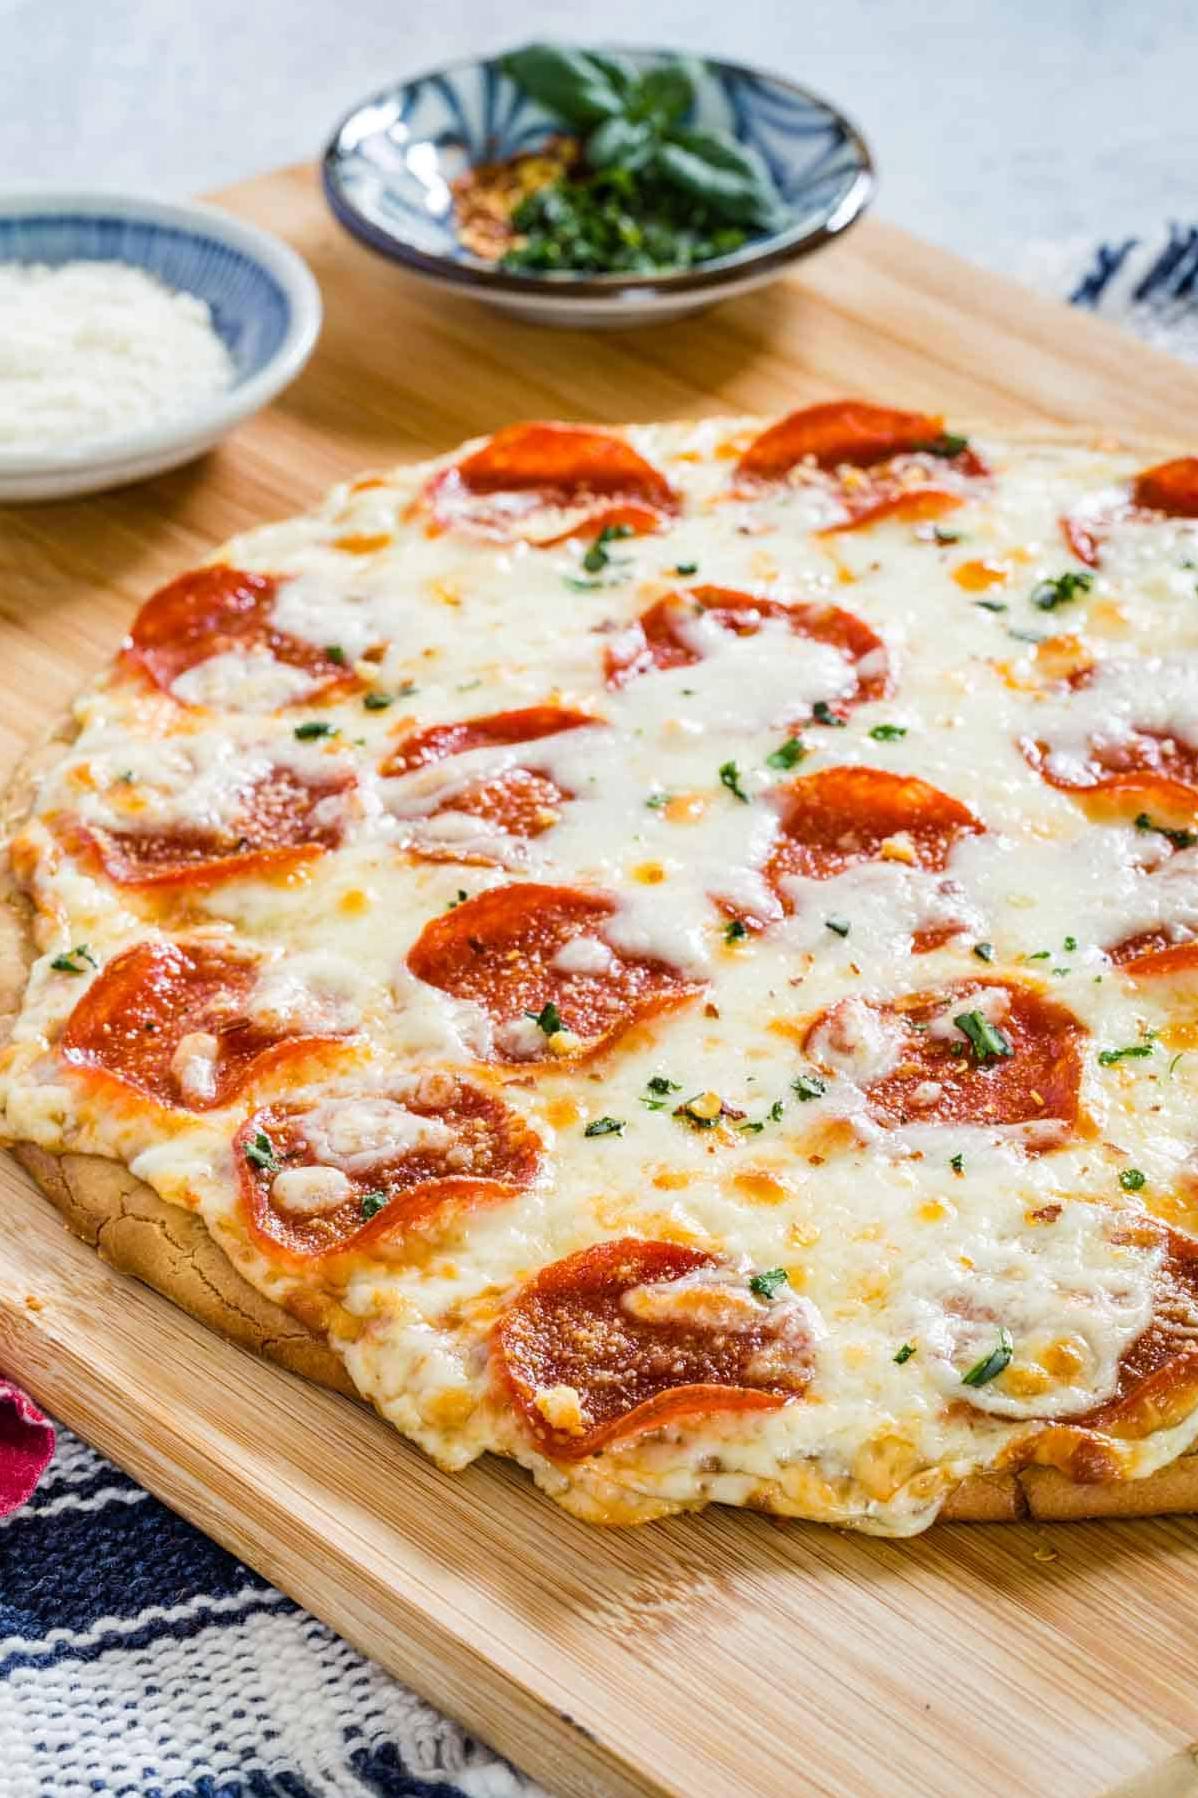  Each slice of this Pepperoni Pizza Pie is loaded with flavor and will have you coming back for seconds.